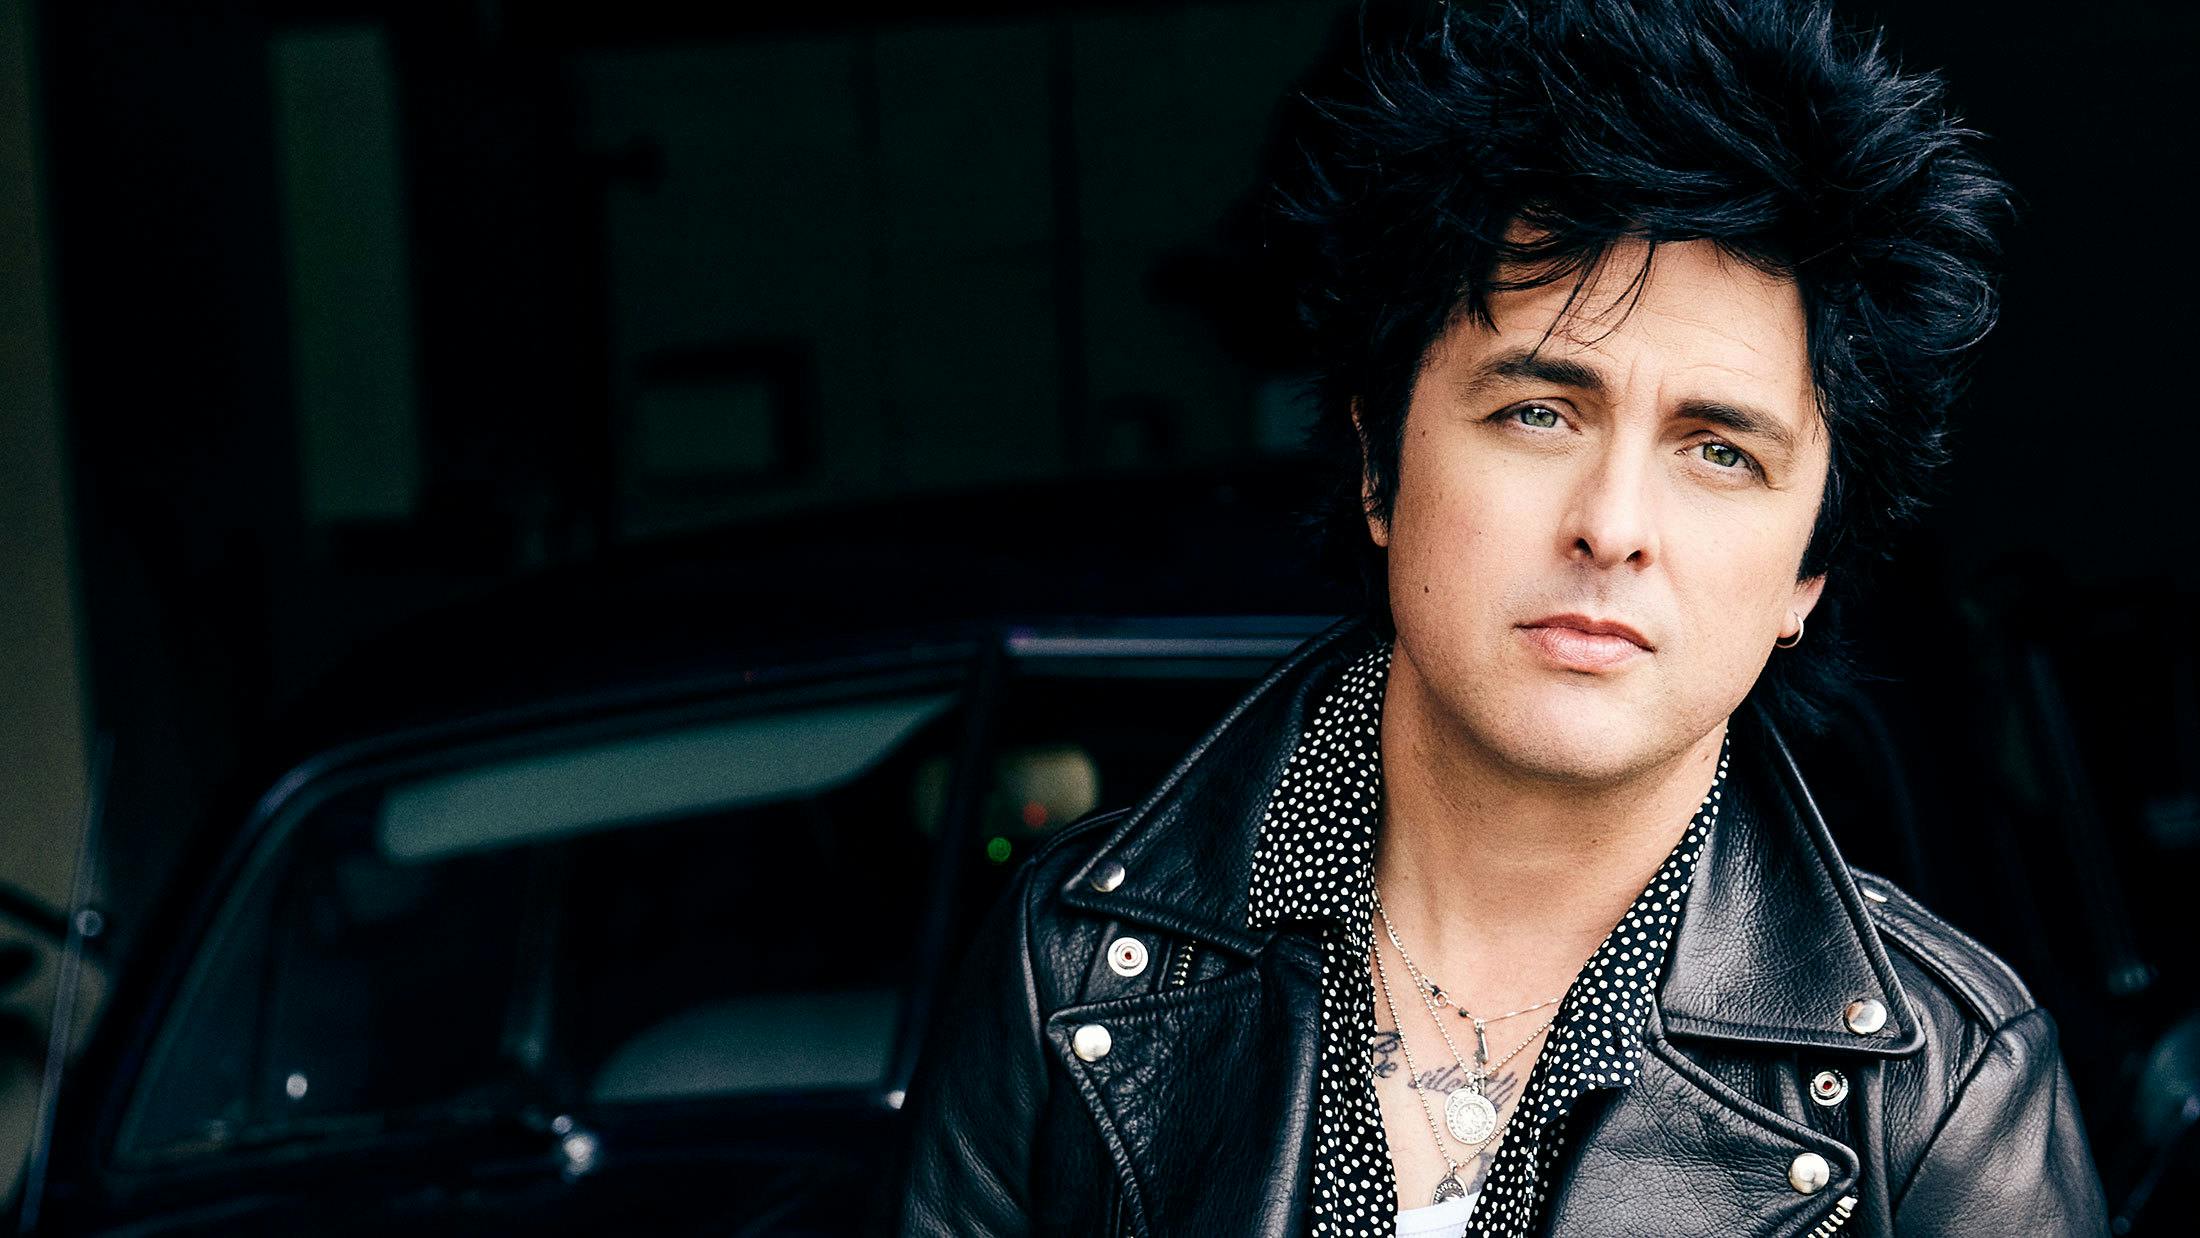 Billie Joe Armstrong: Life lessons in punk rock